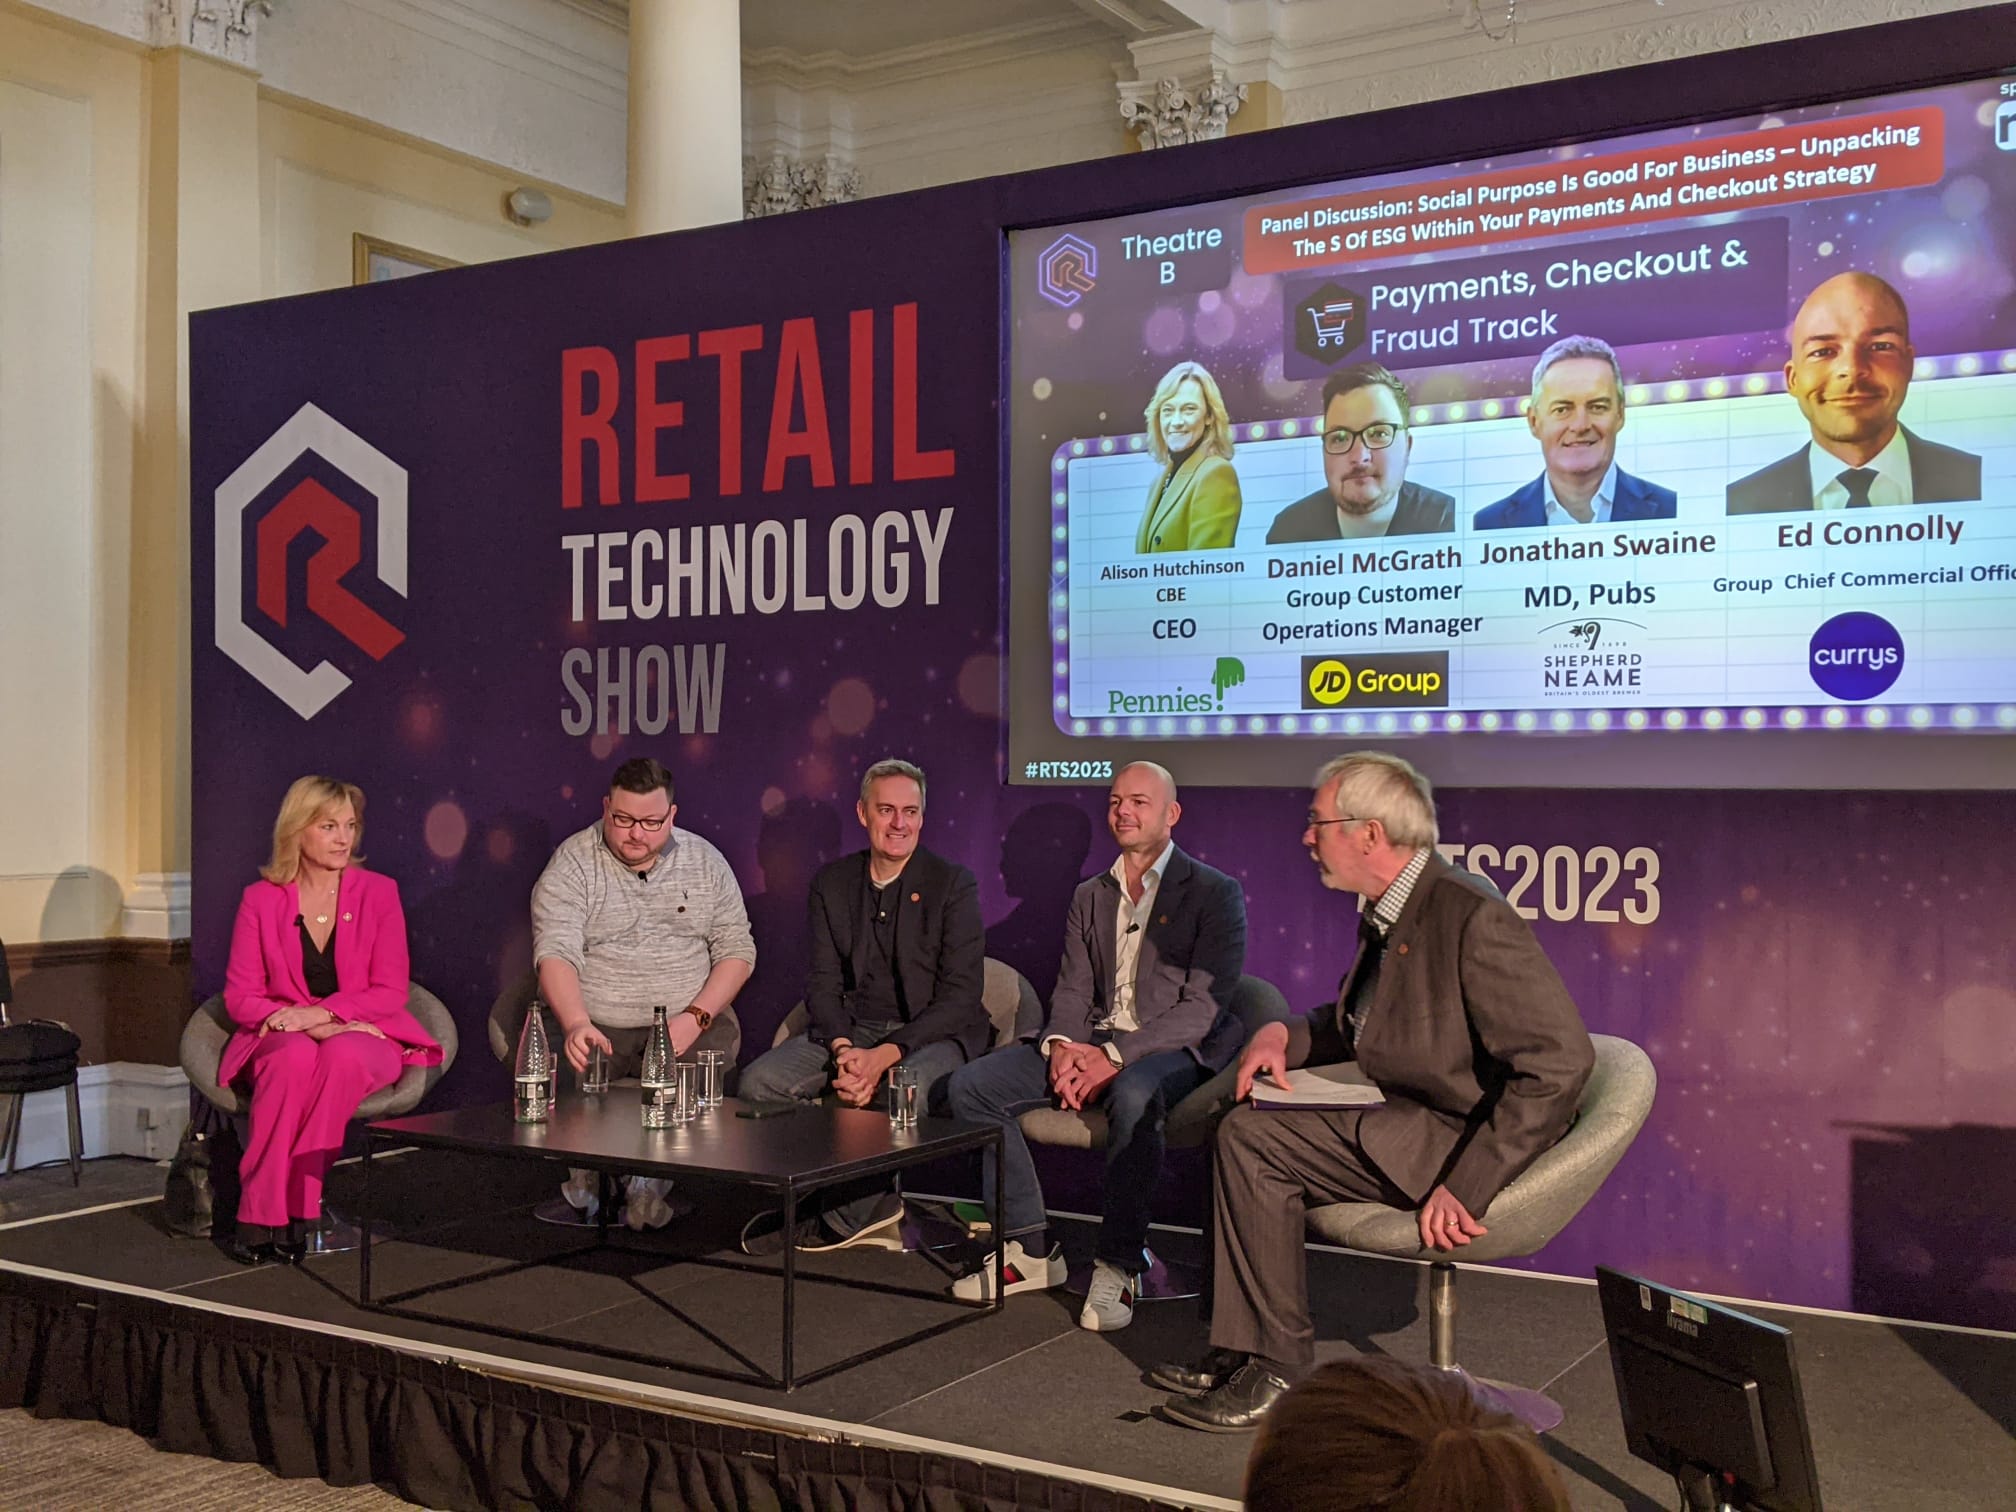 Pennies Panel Session at Retail Technology Show 2023